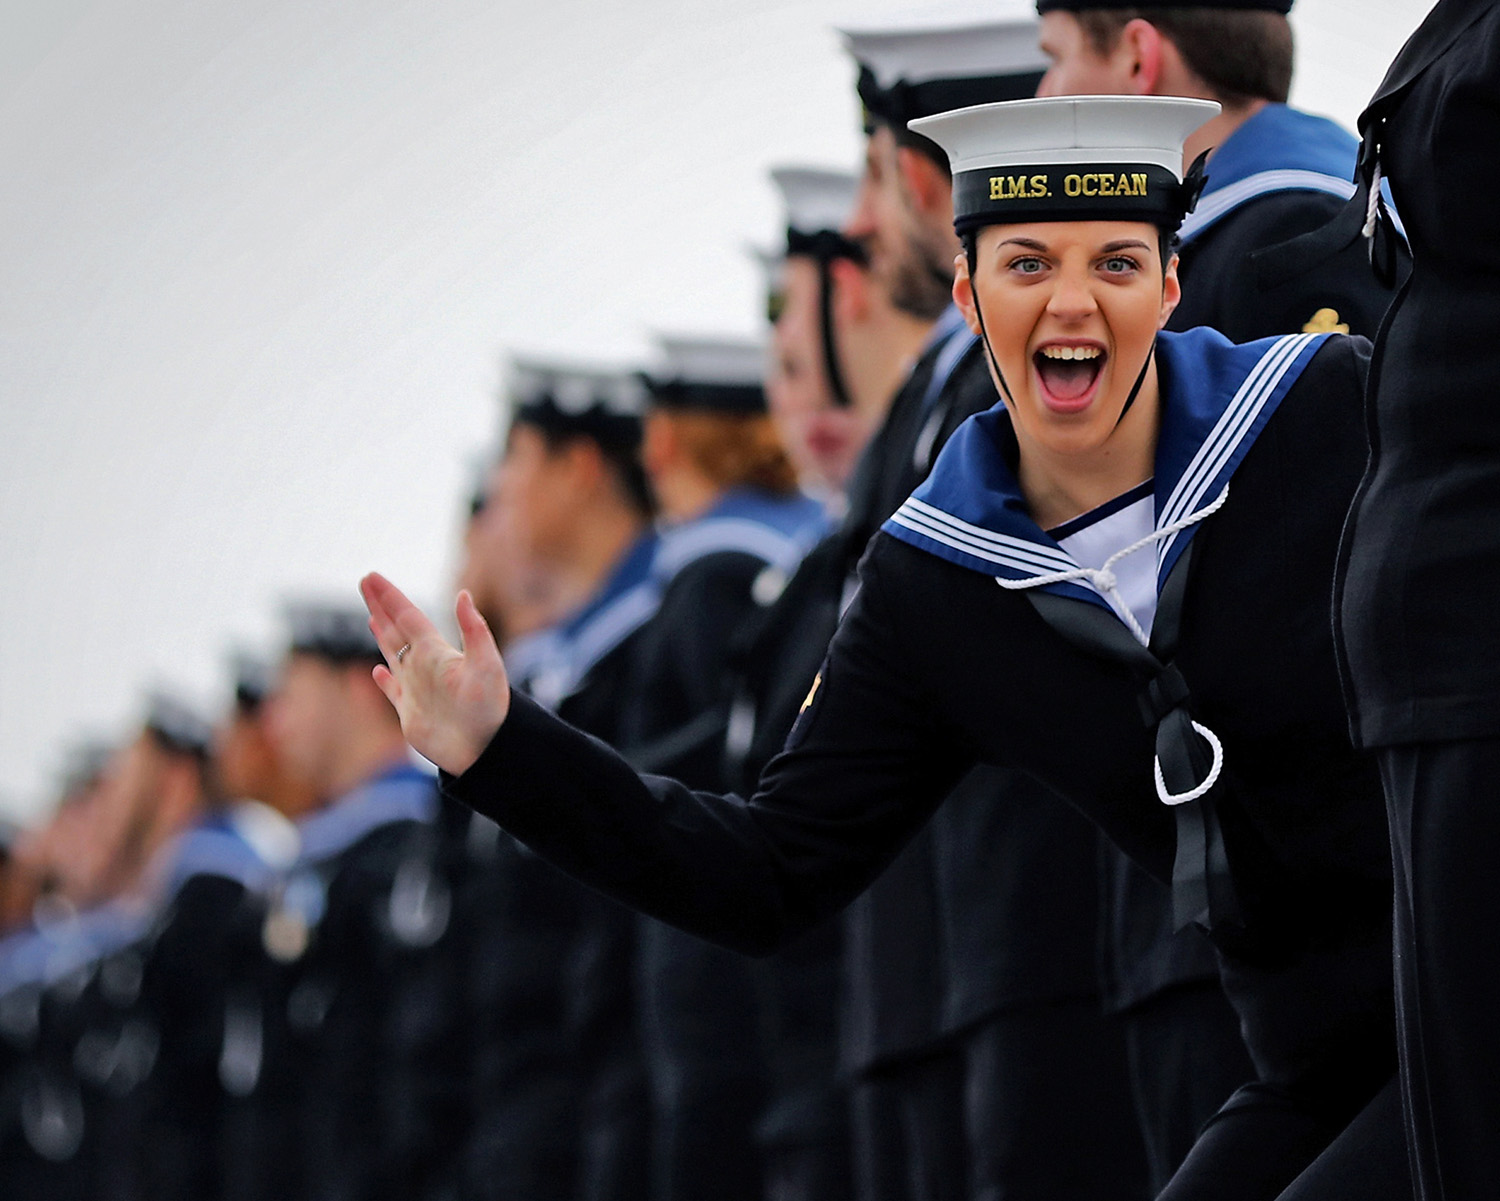 Royal Navy Named As A Top Employer For Women In The Times Top 50 List